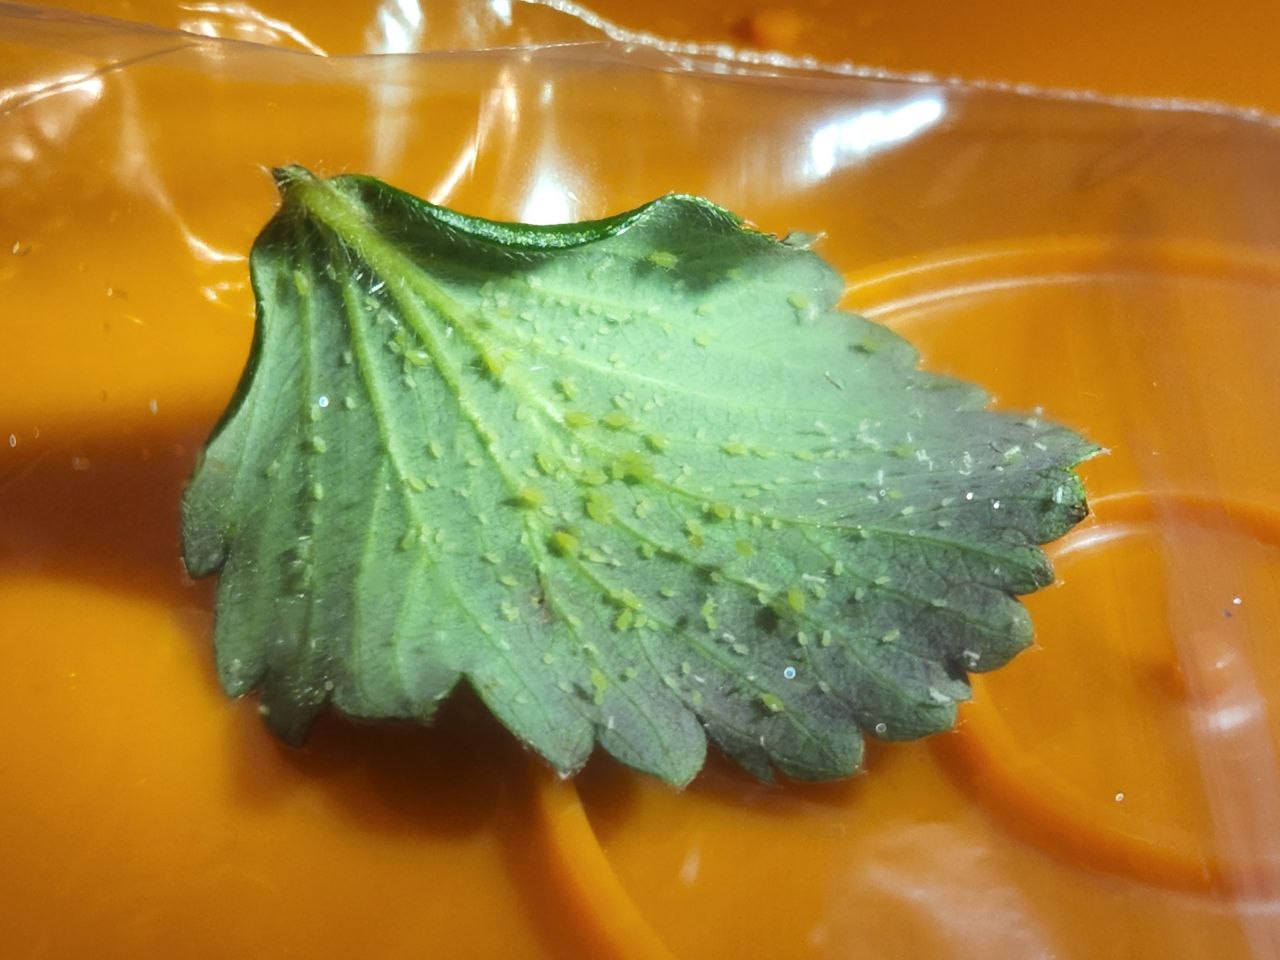 underside of a green leaf in a plastic bag. several dozen aphids can be seen on it.